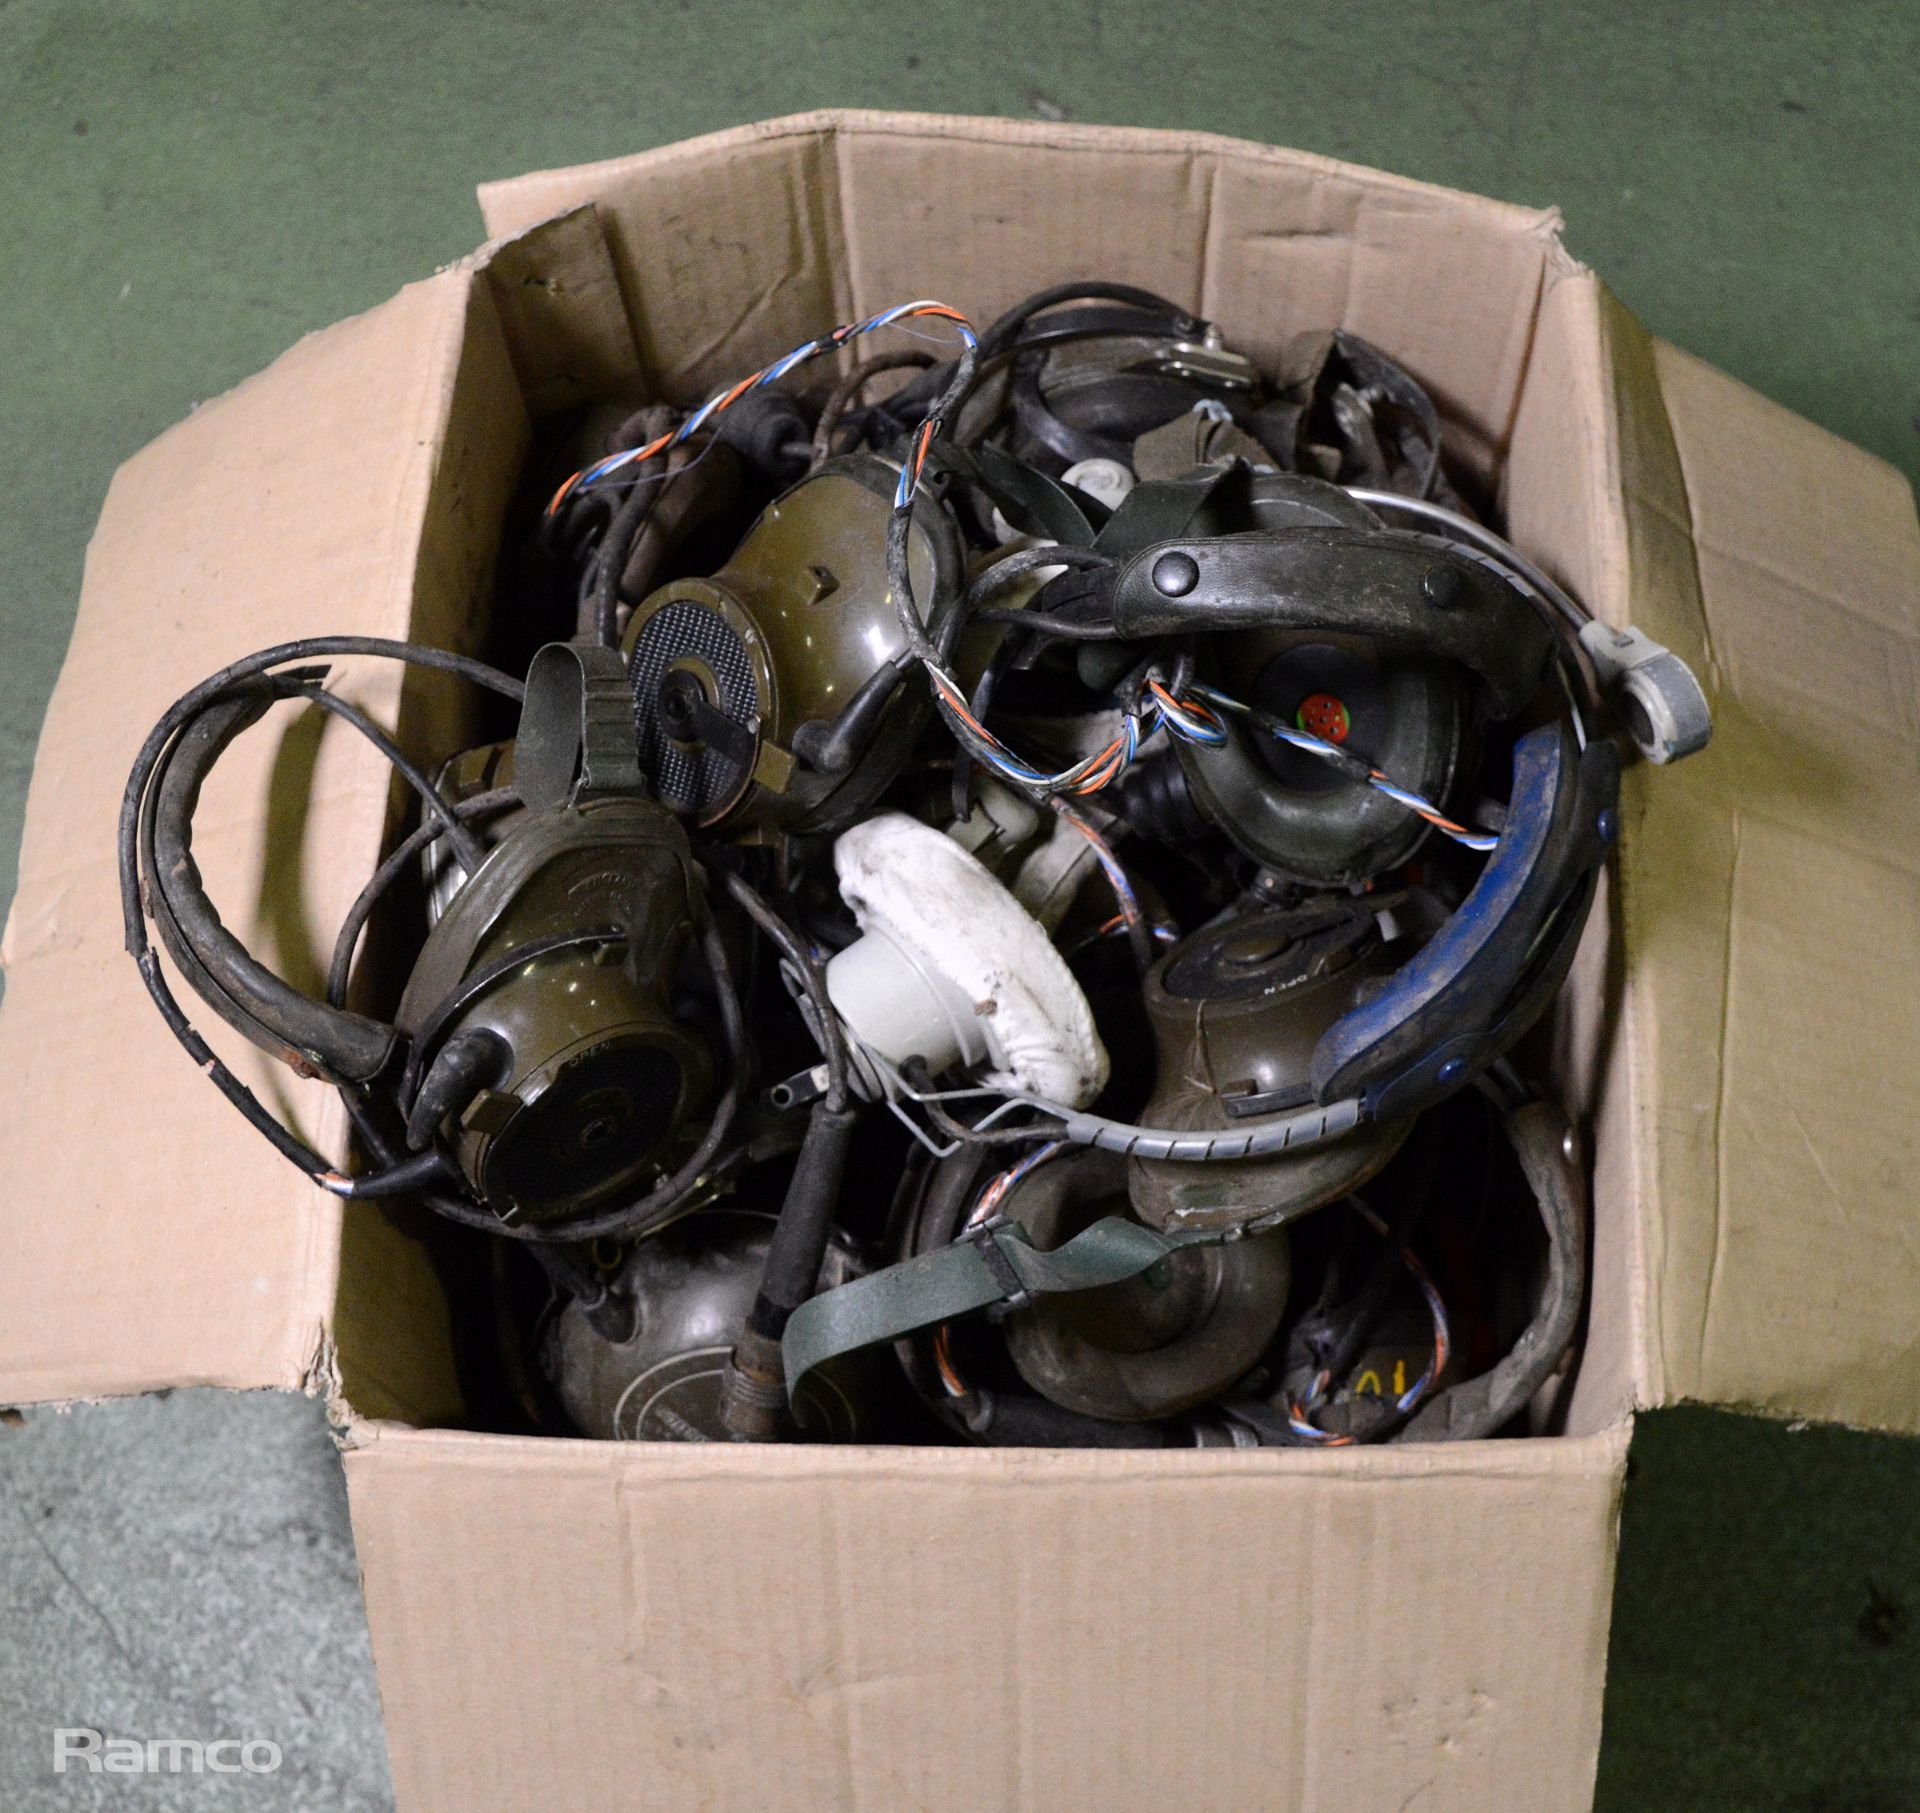 Clansman headsets - AS SPARES OR REPAIRS